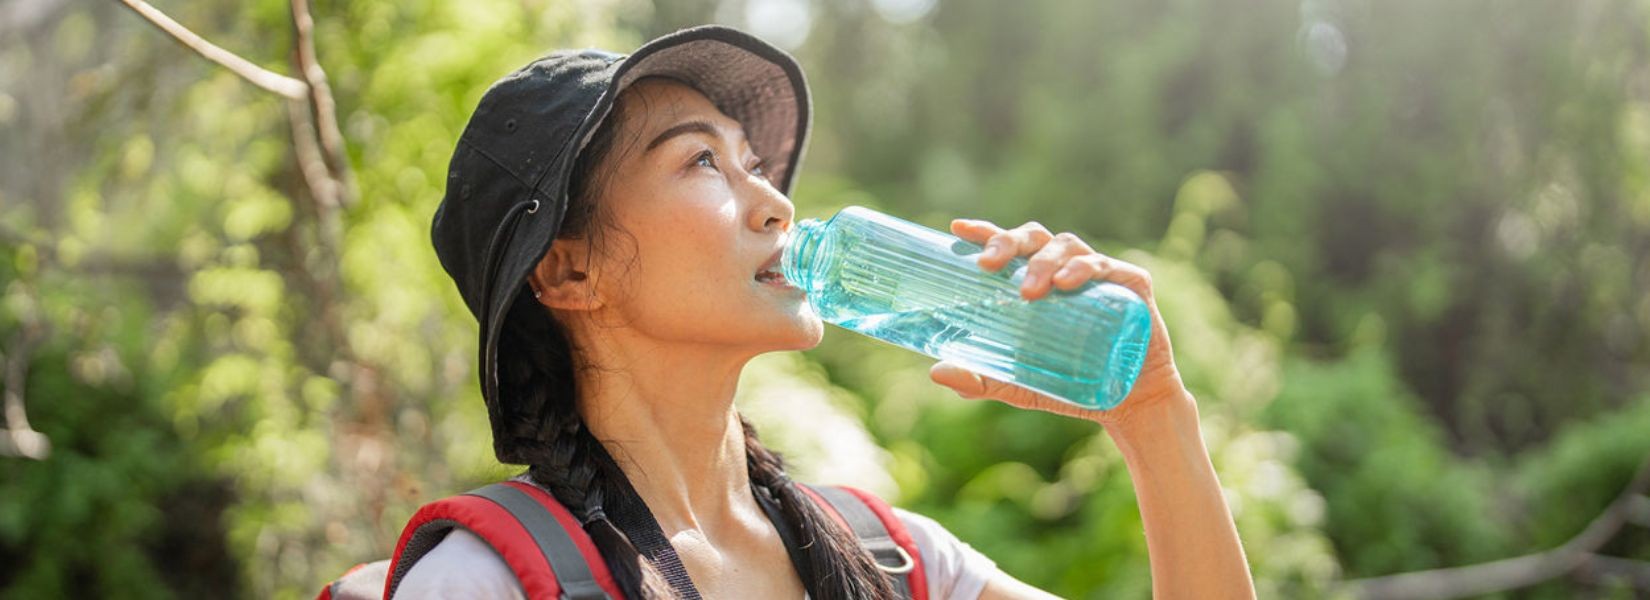 How to Drink Clean Water while Trekking in Nepal?